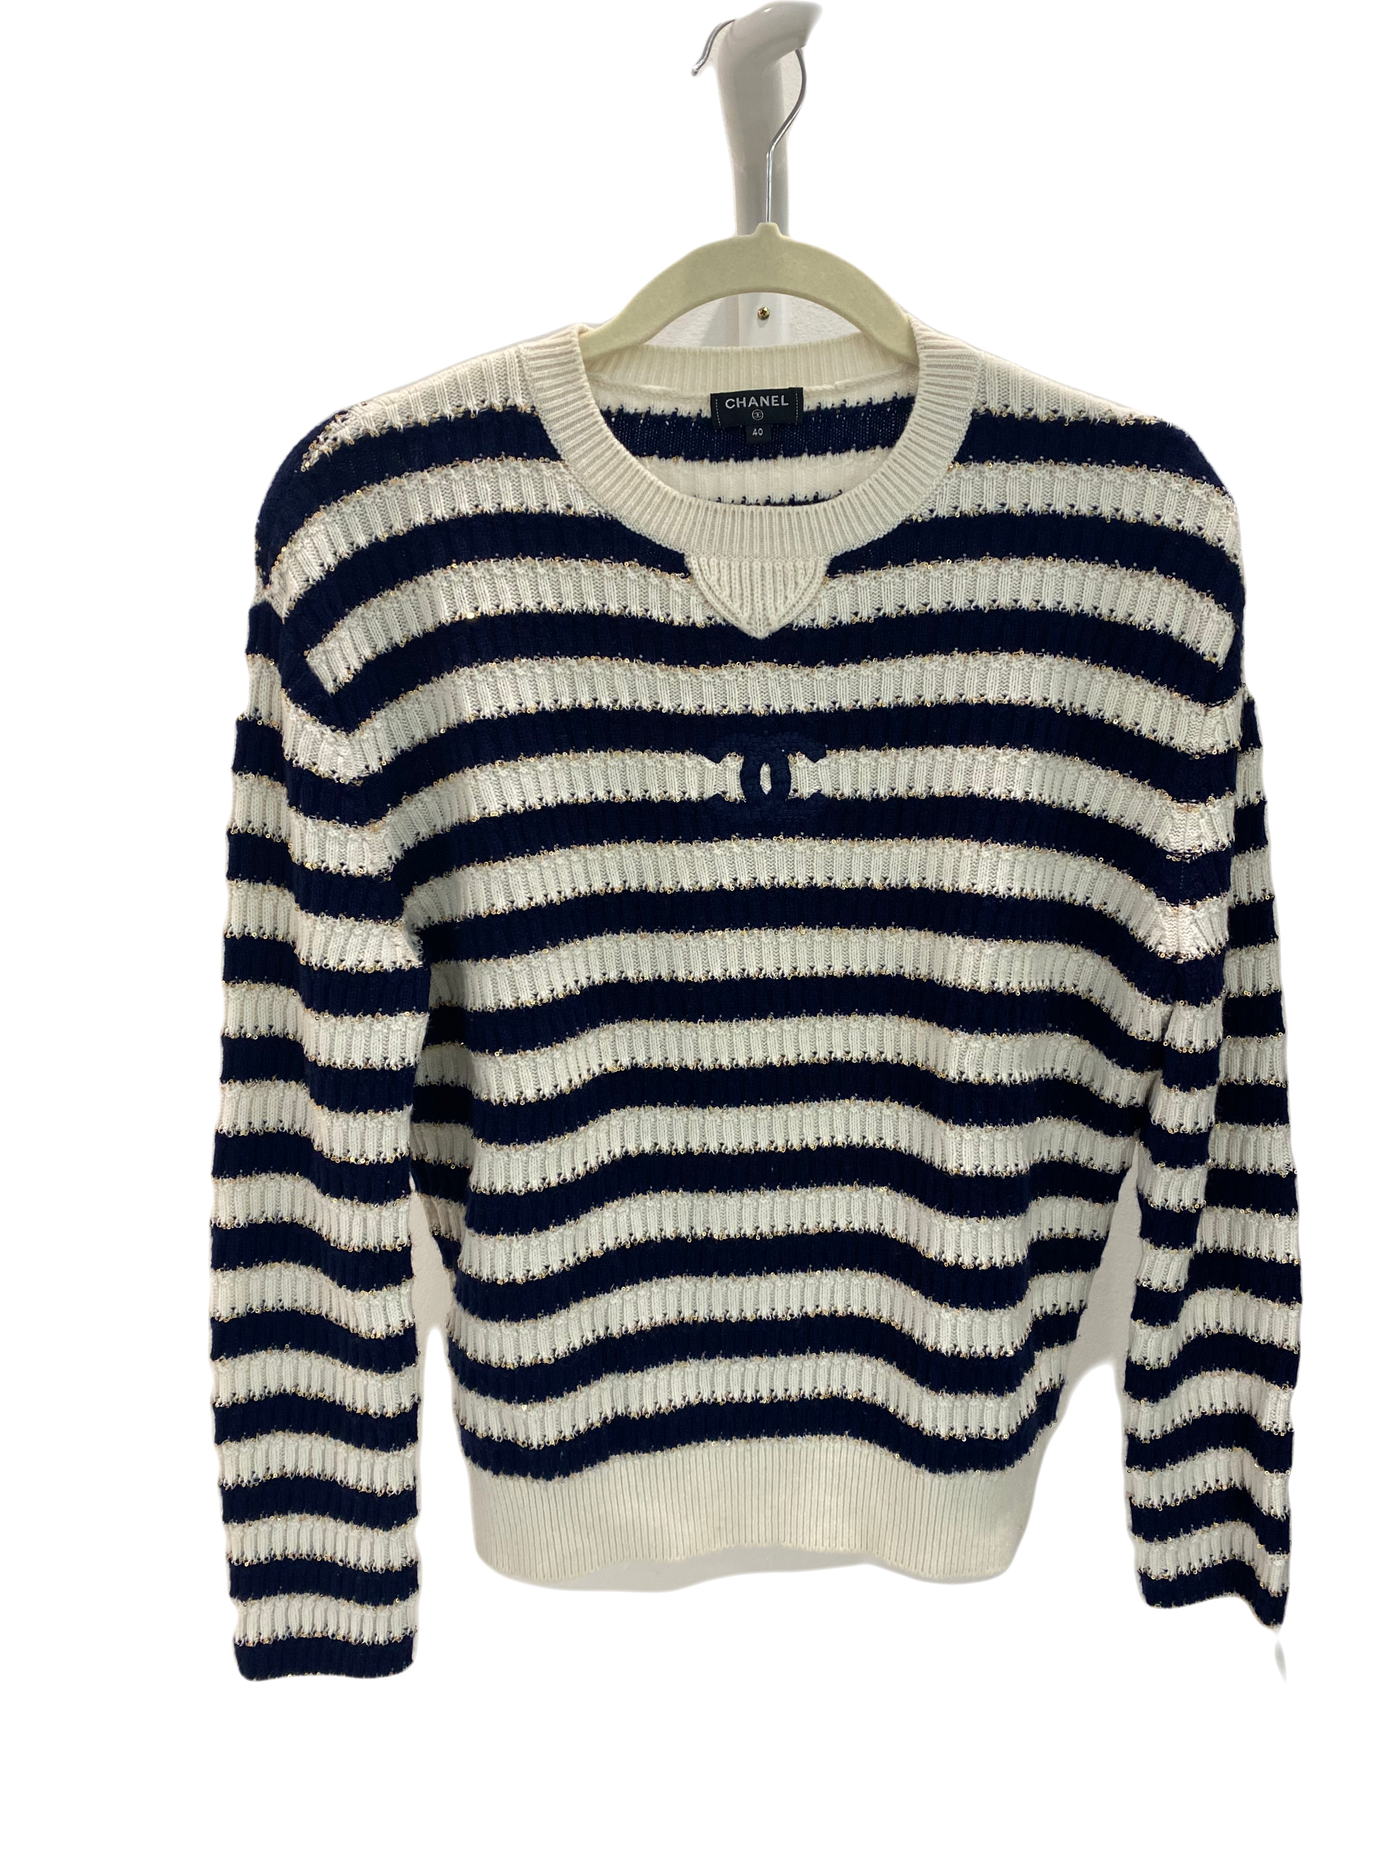 Chanel Striped Jumper Size 40 - SOLD